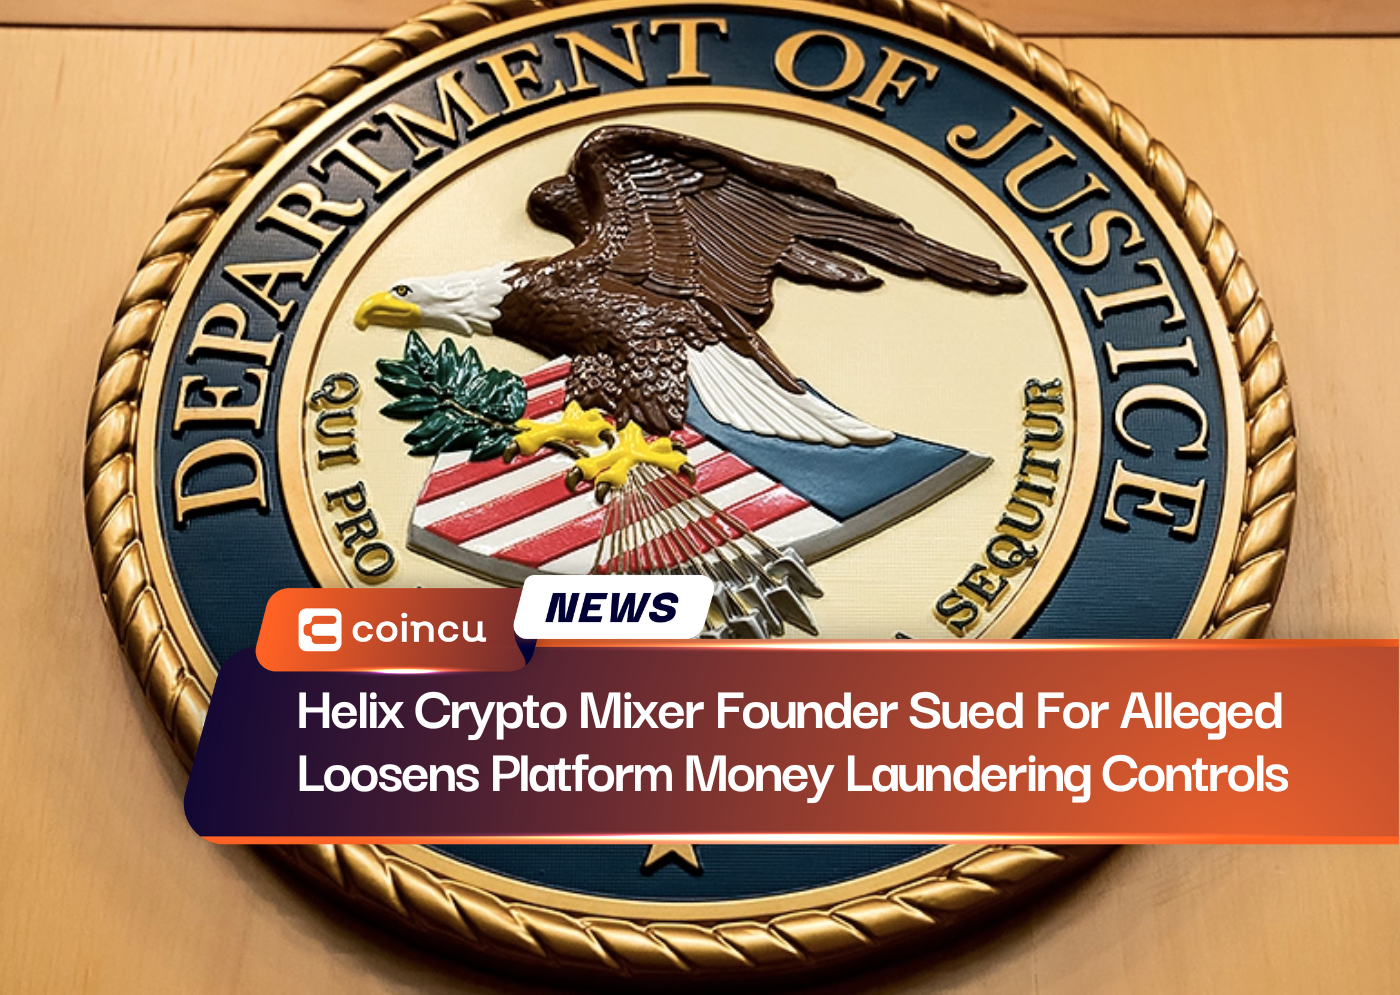 Helix Crypto Mixer Founder Sued For Alleged Loosens Platform Money Laundering Controls